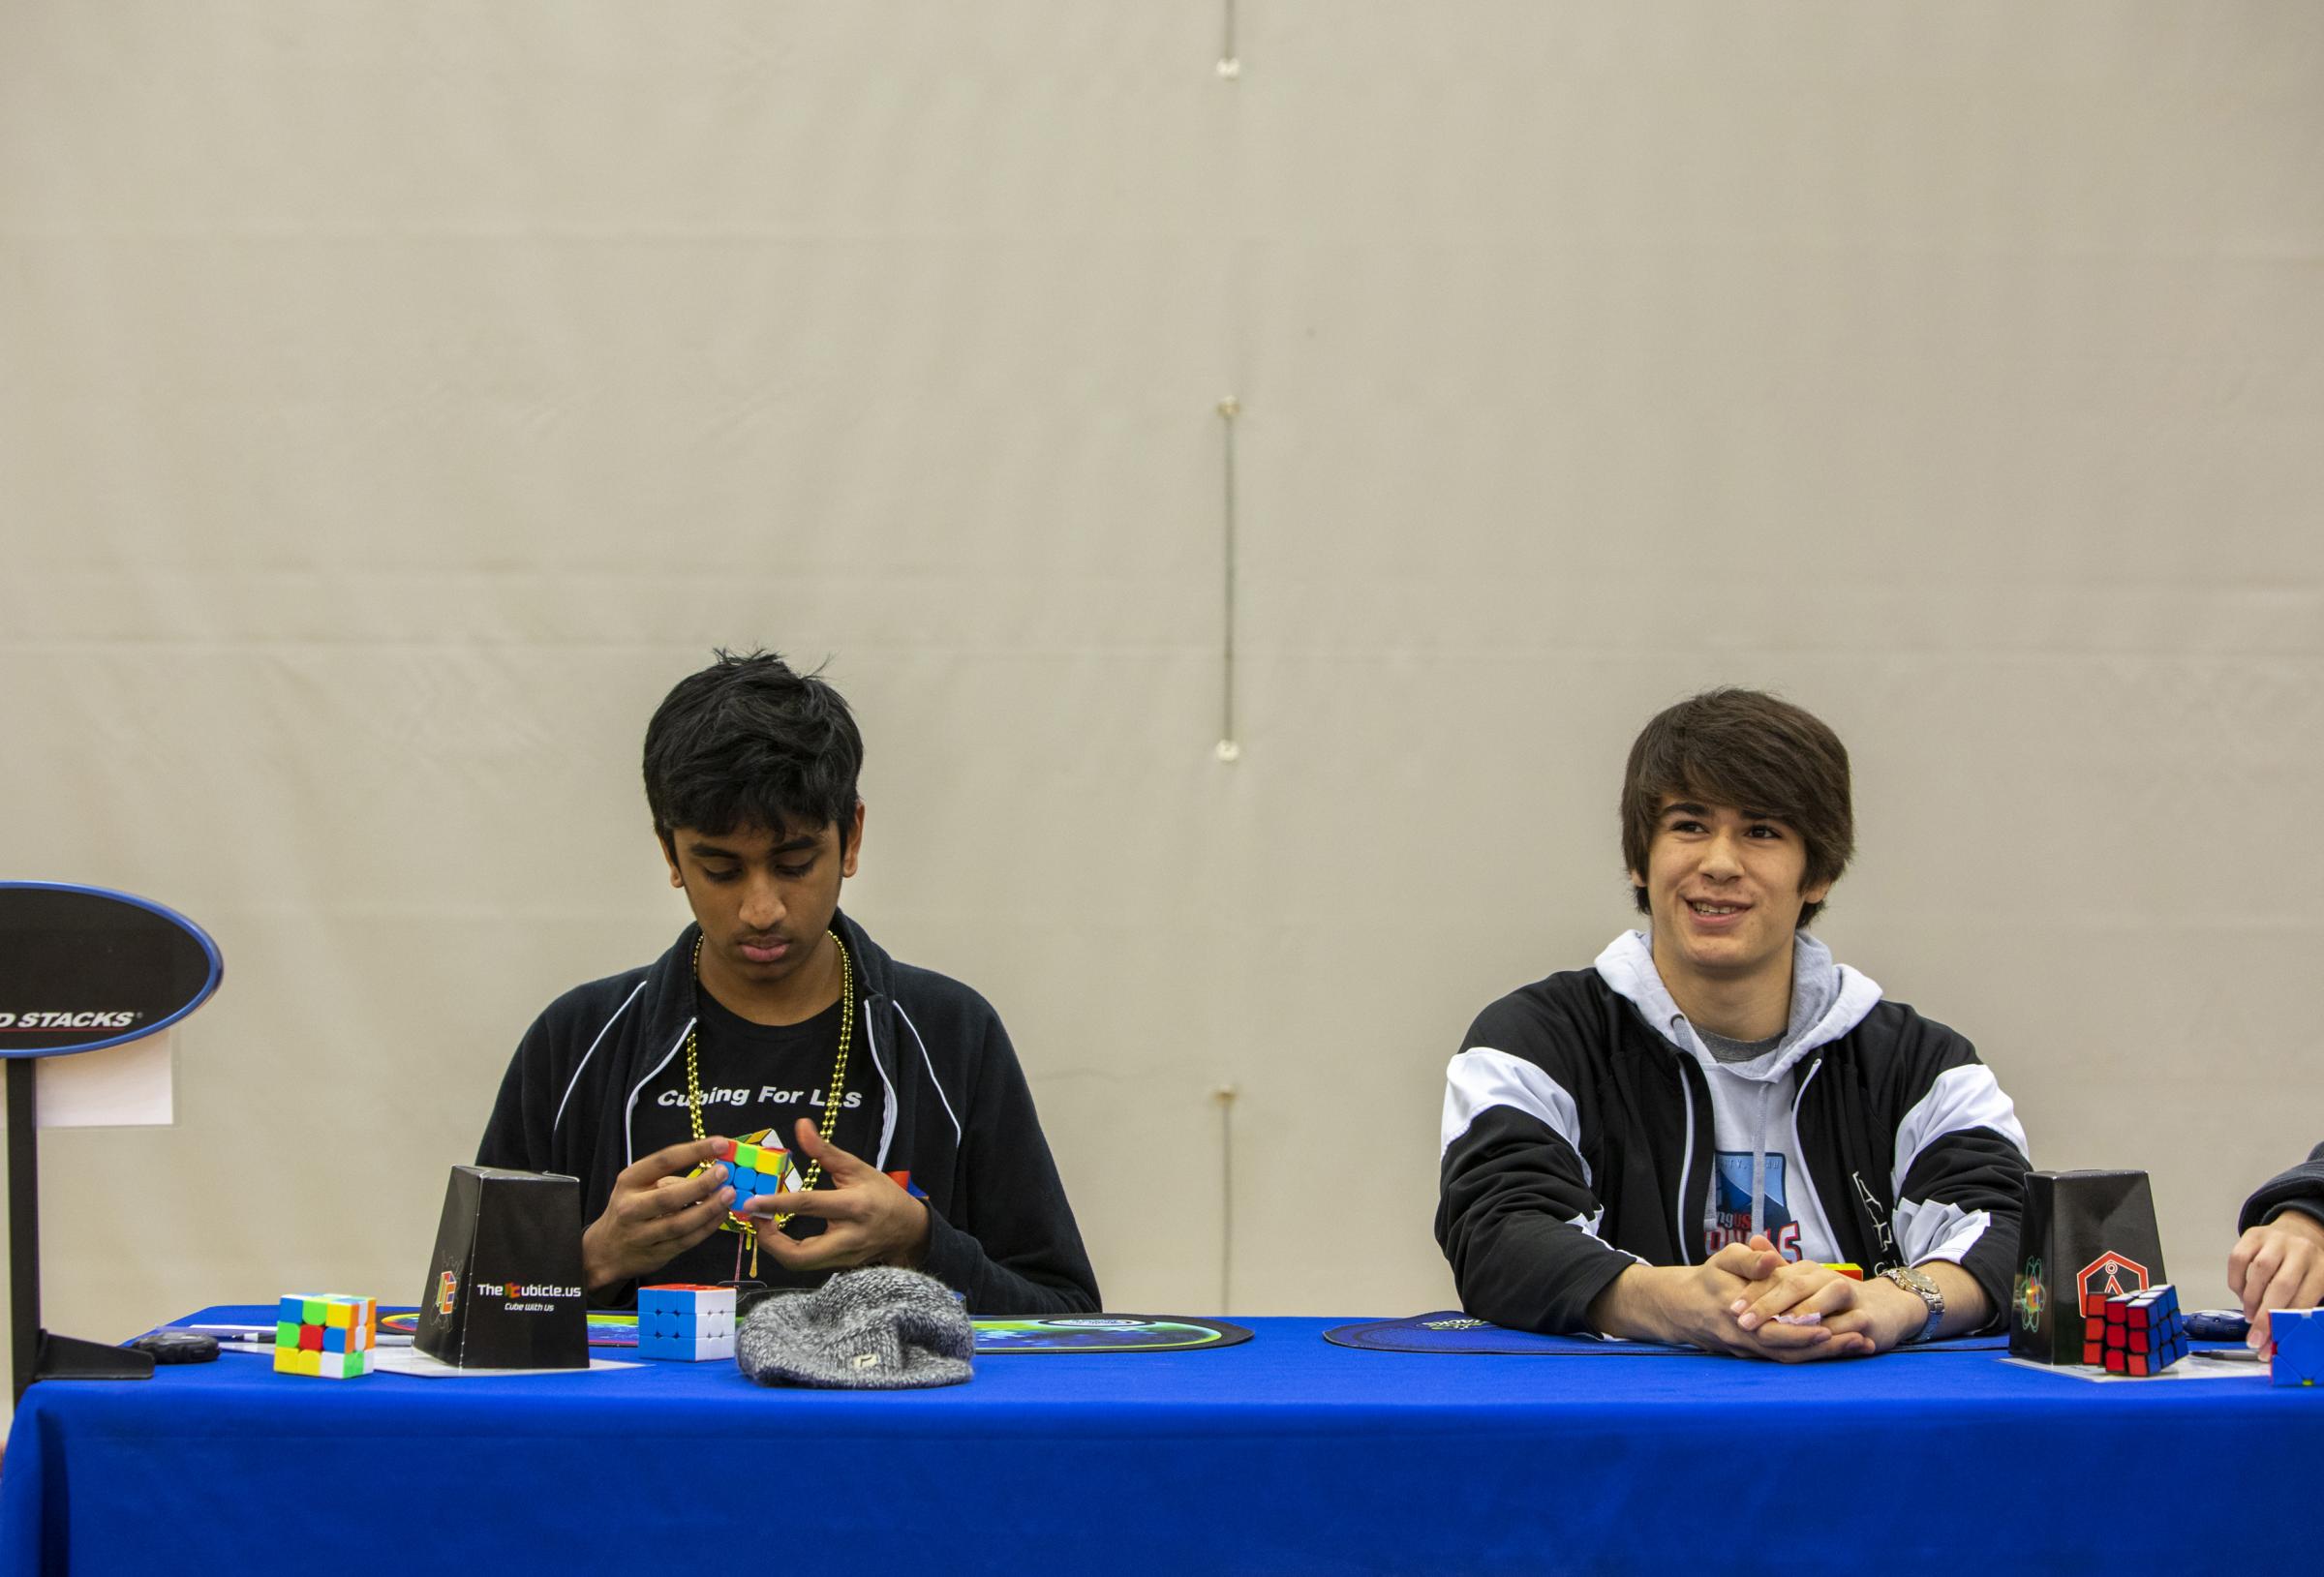 Speedcubers - The competitor on the right uses hand warmers between solves to help keep his fingers moving...